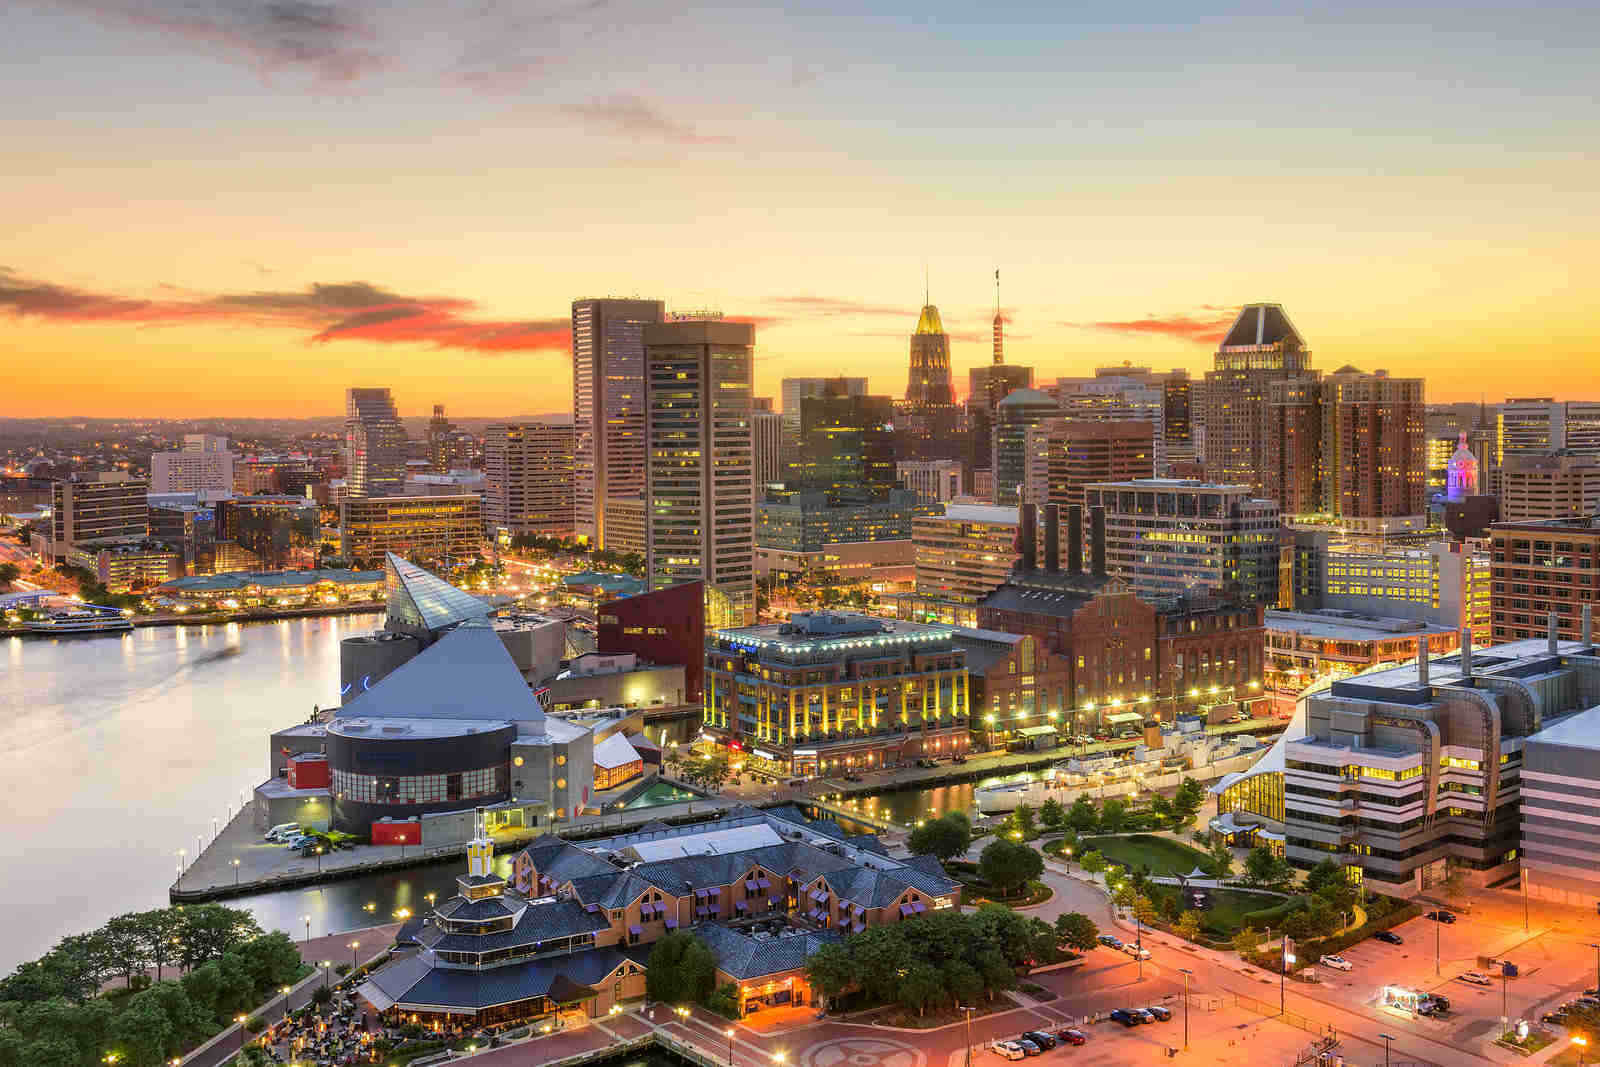  You can move to Washington DC but choose to live in beautiful Baltimore, MD